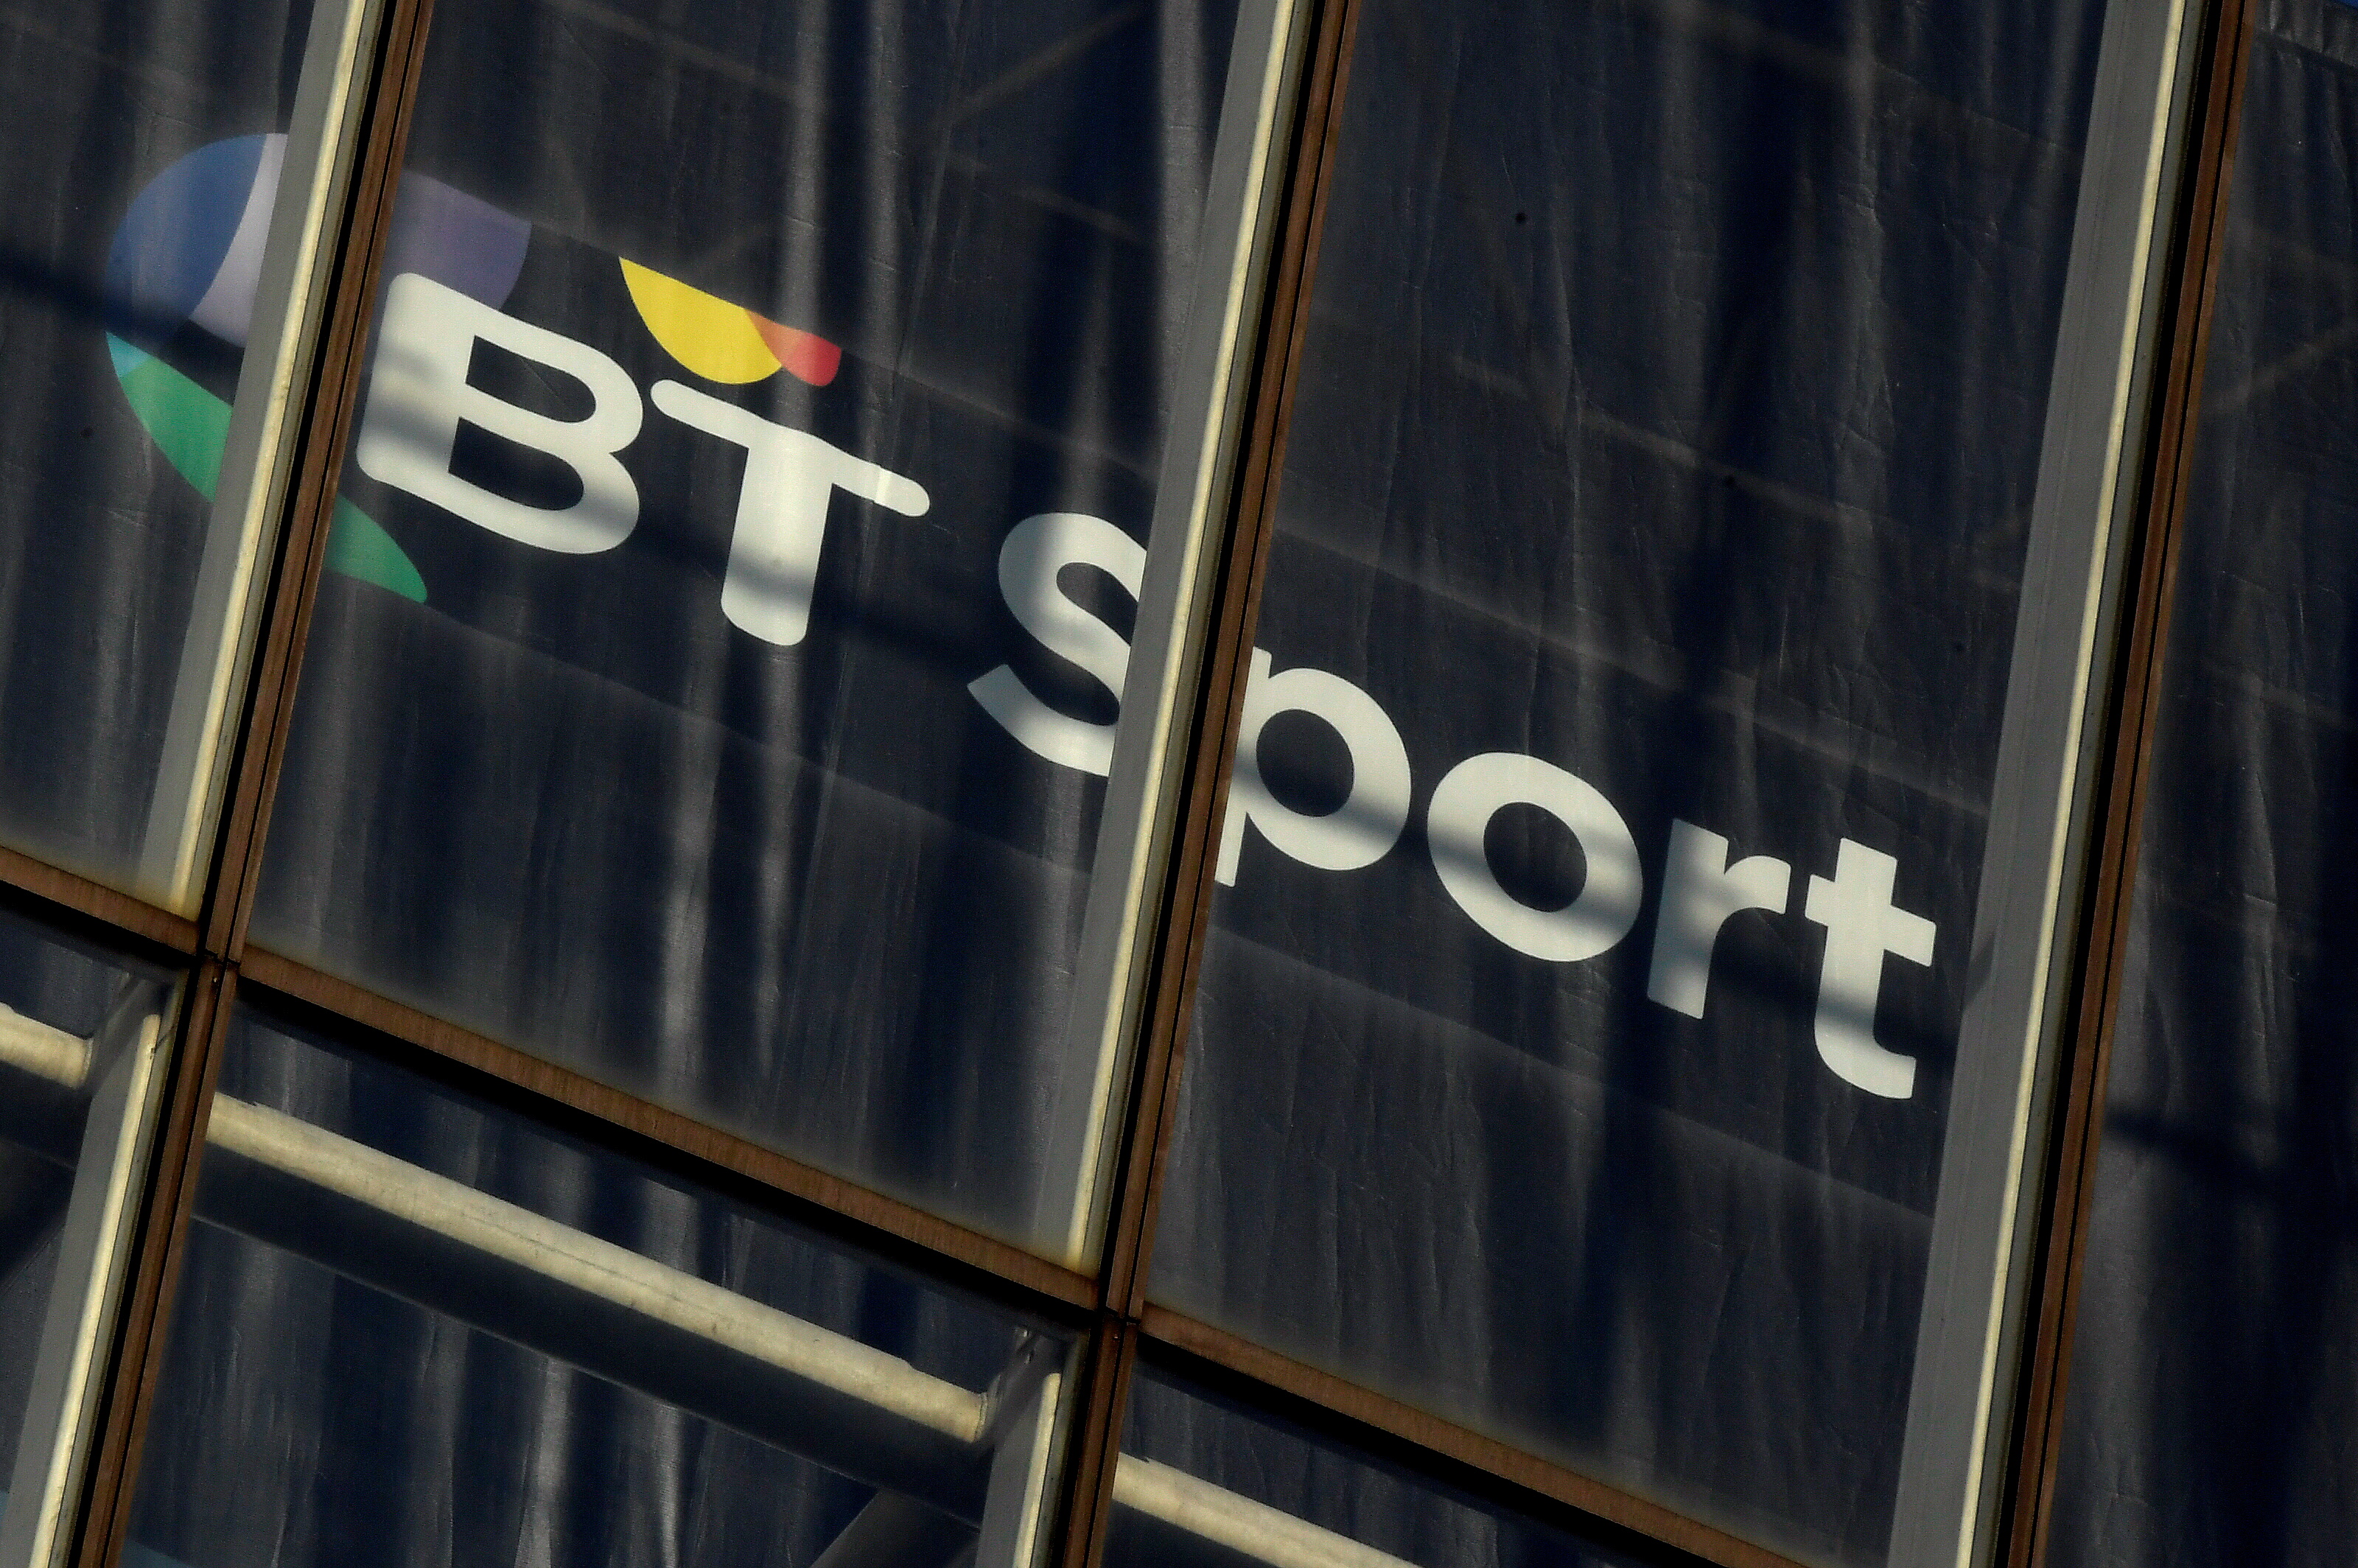 A BT Sport logo is displayed in an office in the City of London